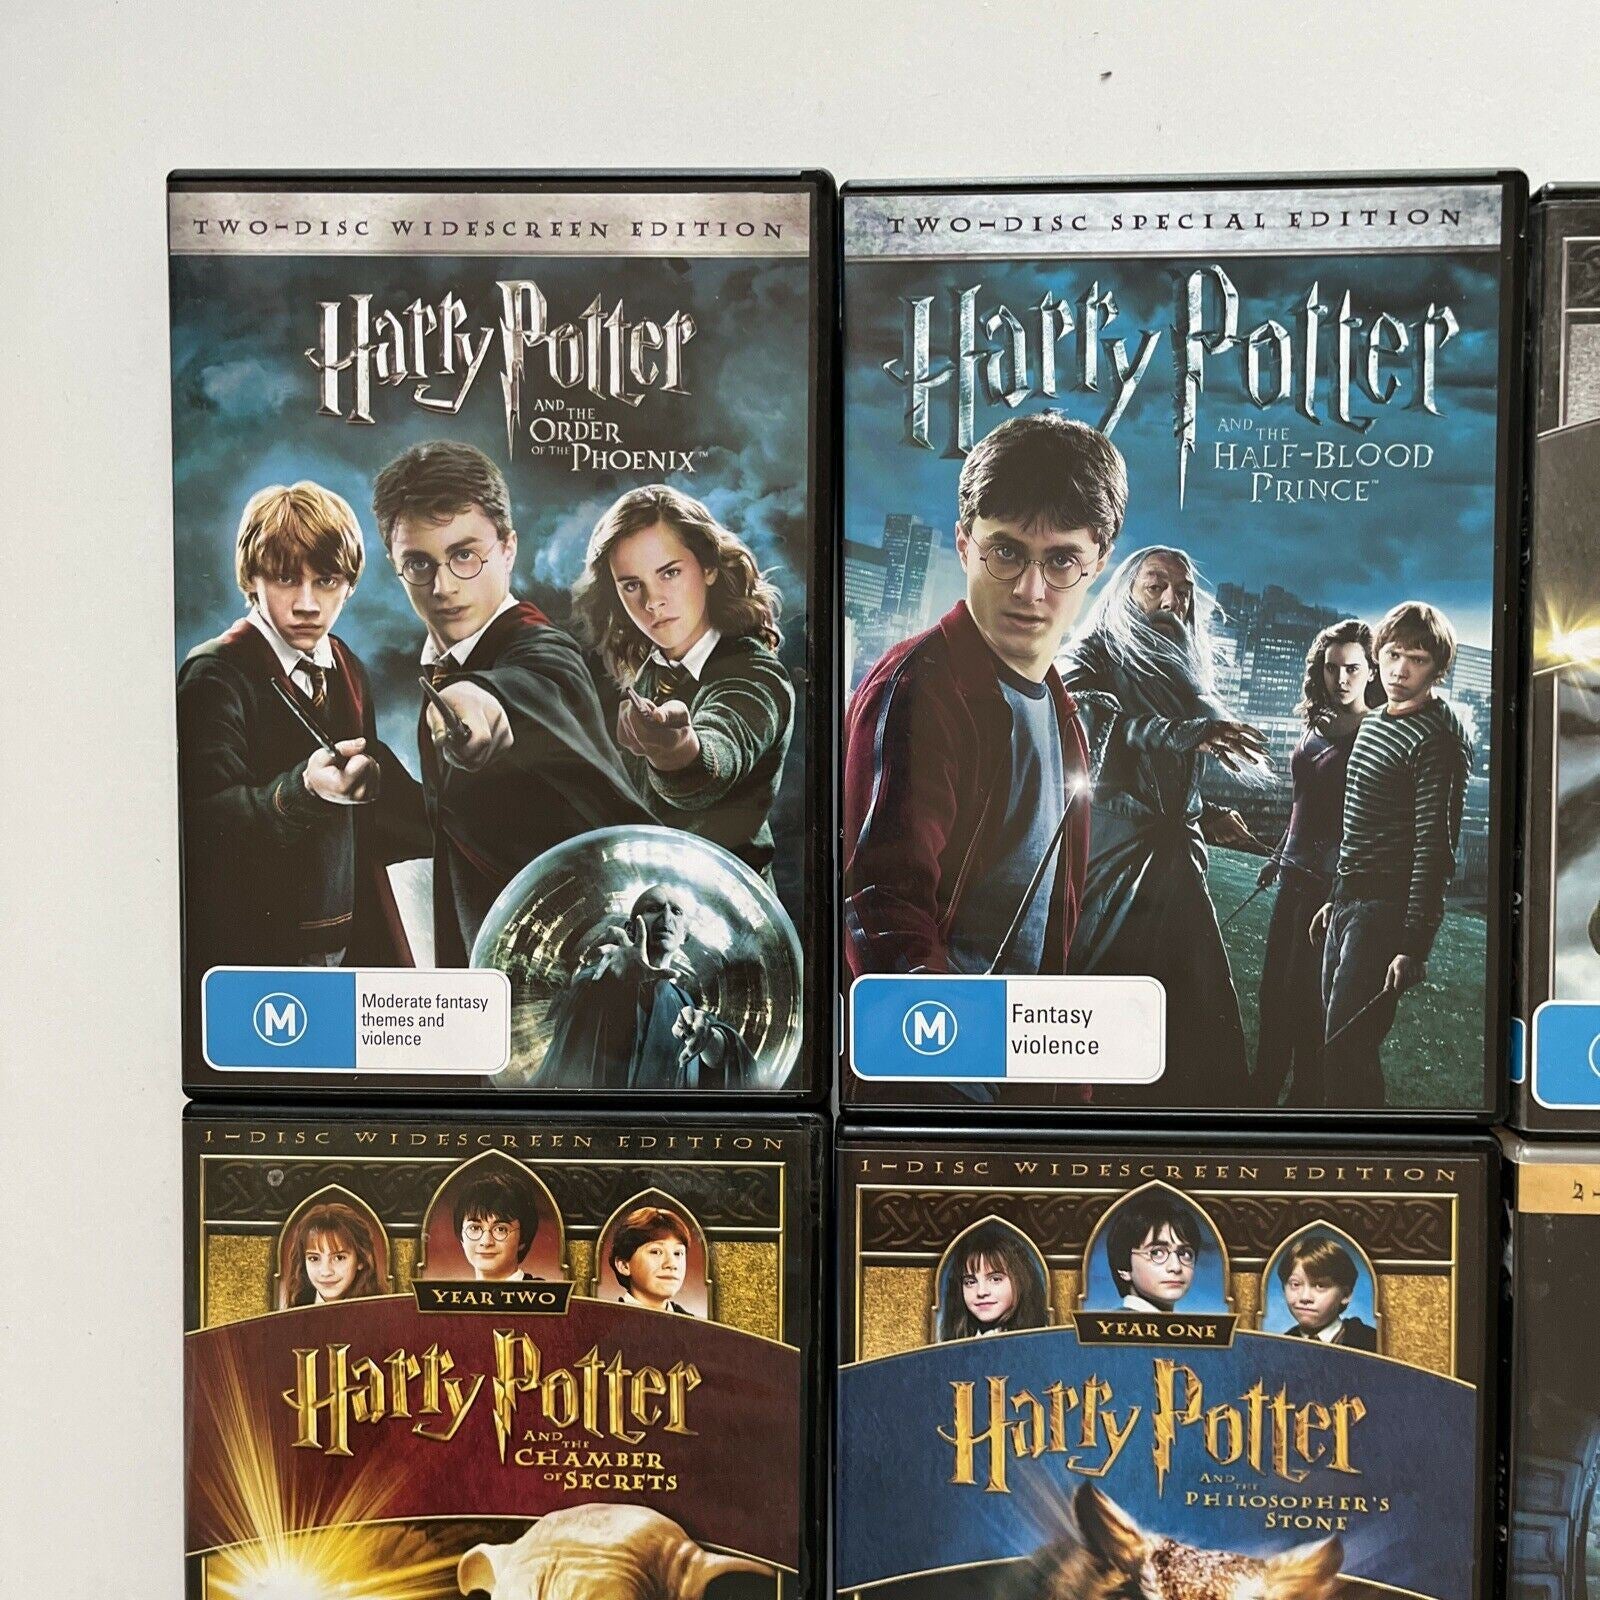 Complete Set of all 8 Harry Potter Movies DVD Widescreen Blu-Ray